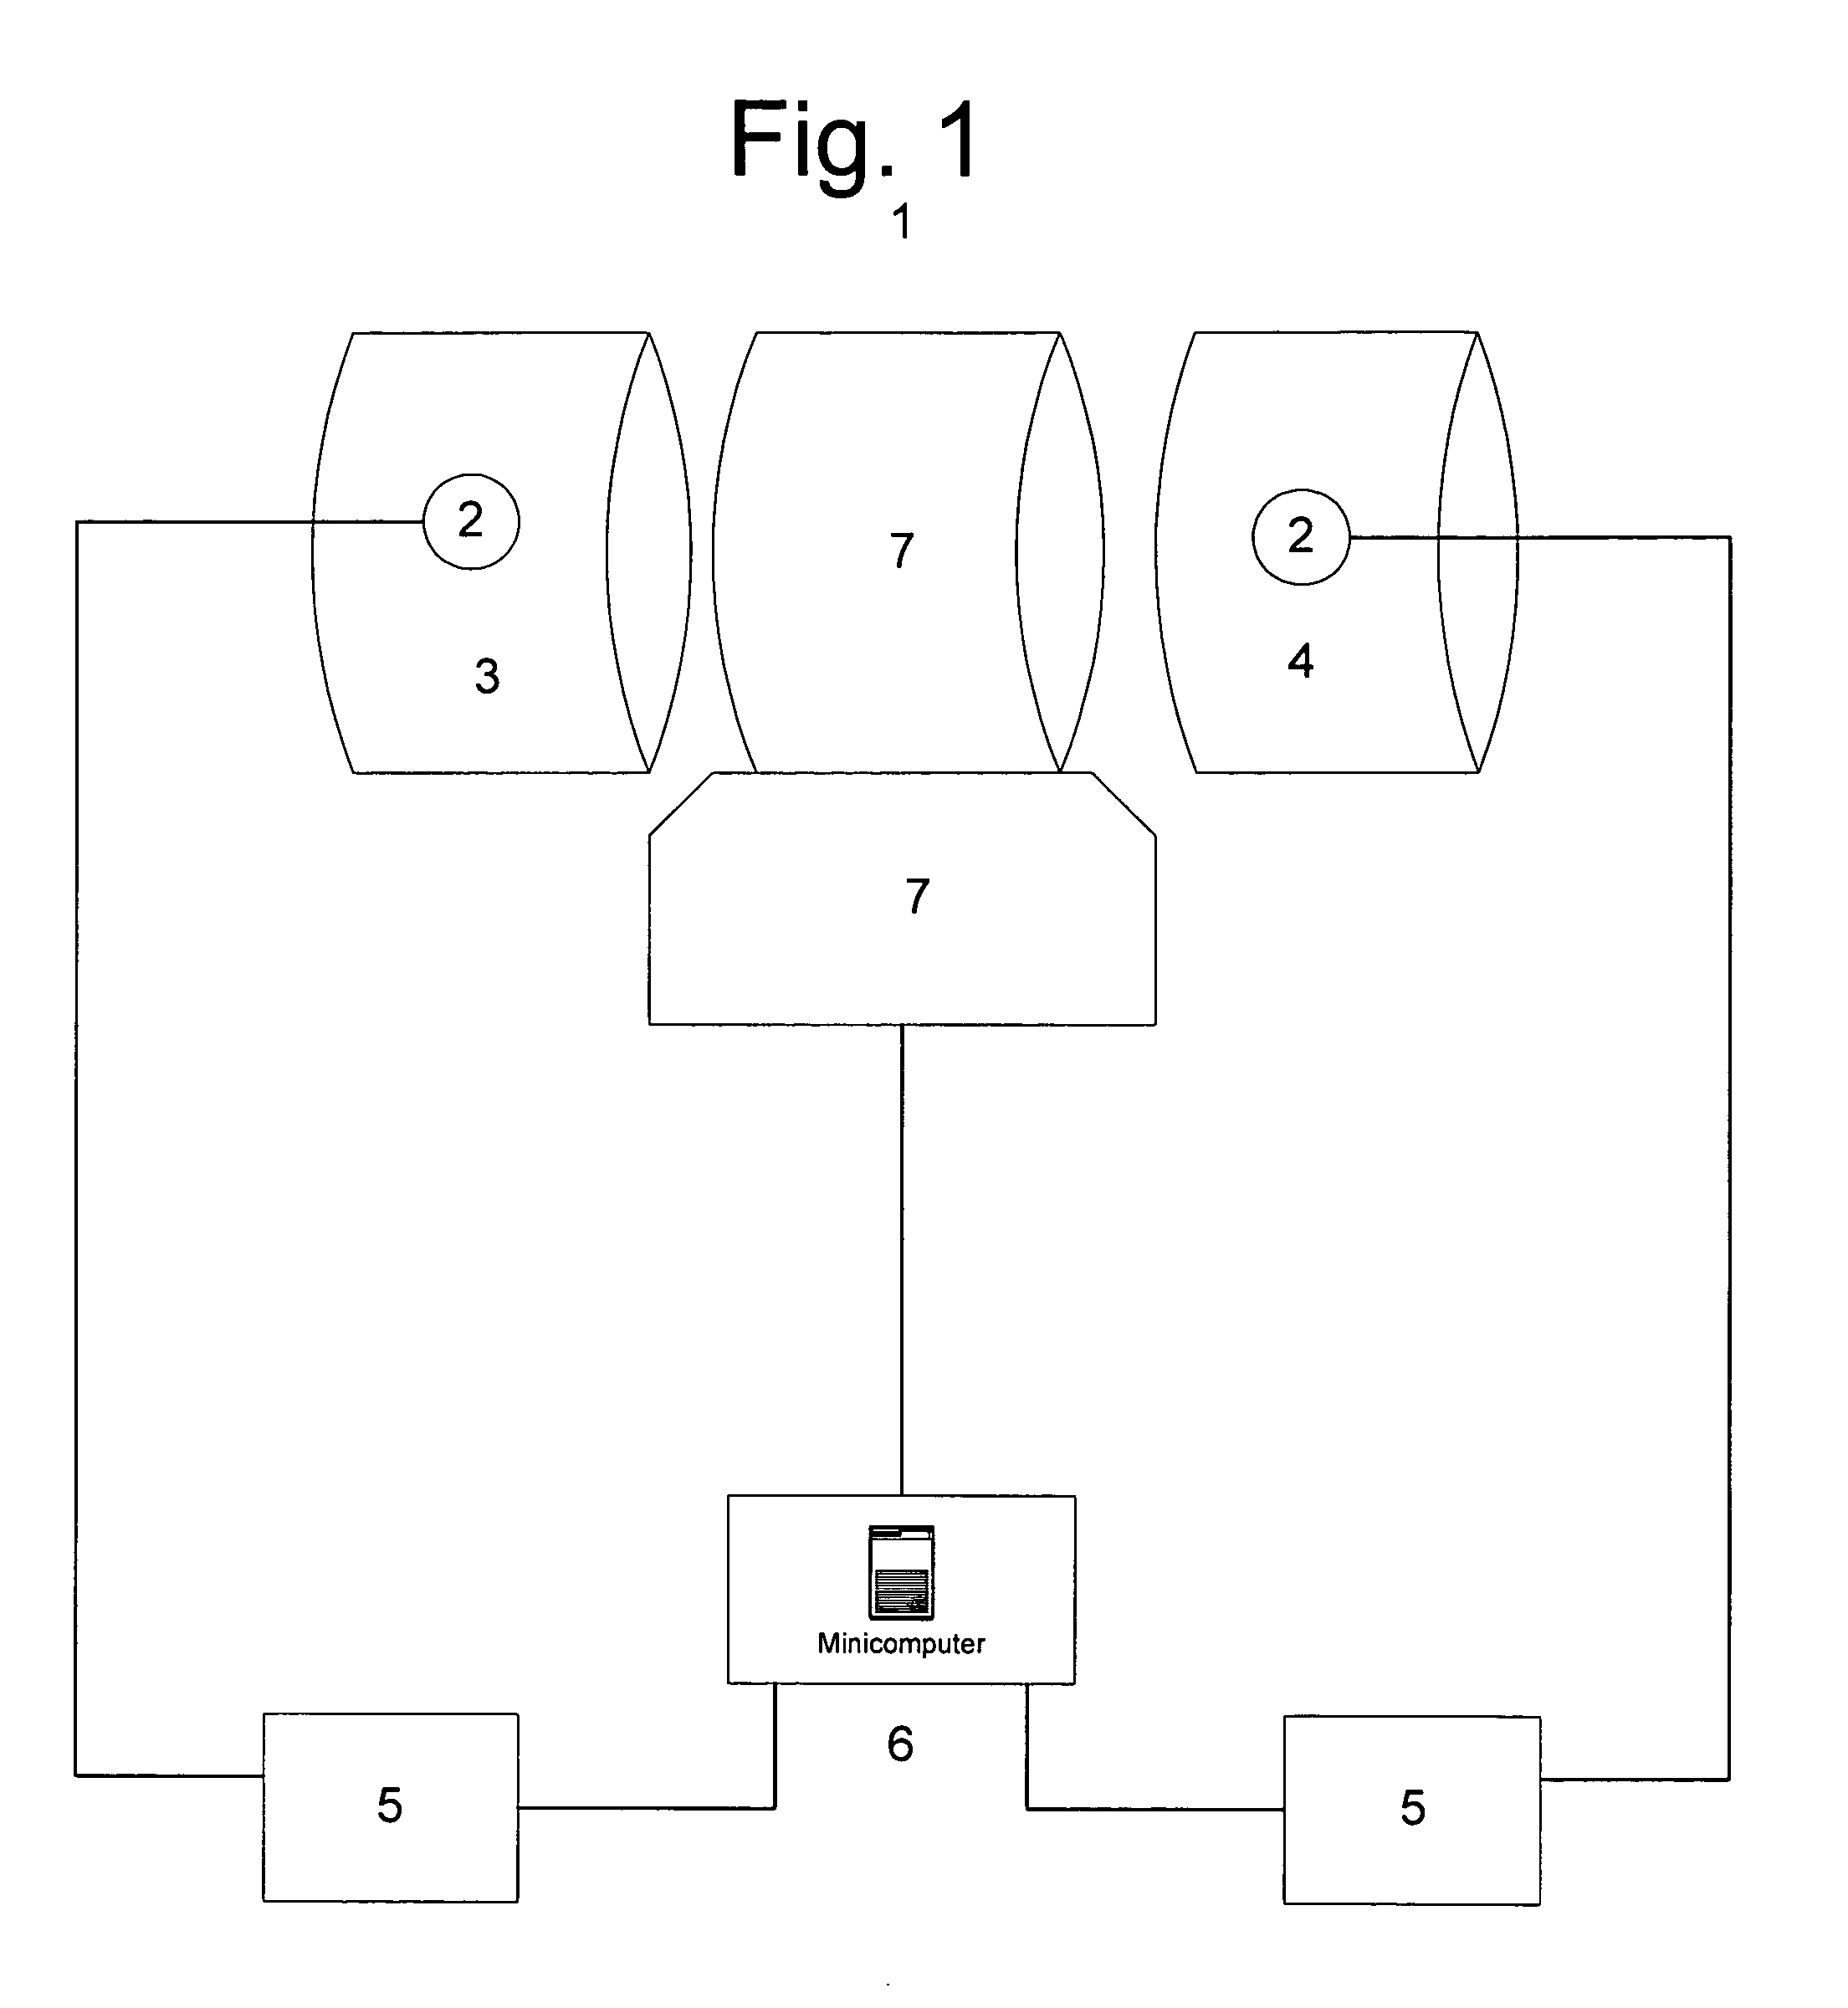 Pumpdosimeter - system and method for automatically controlling fluid parameters in centrifugal pumps